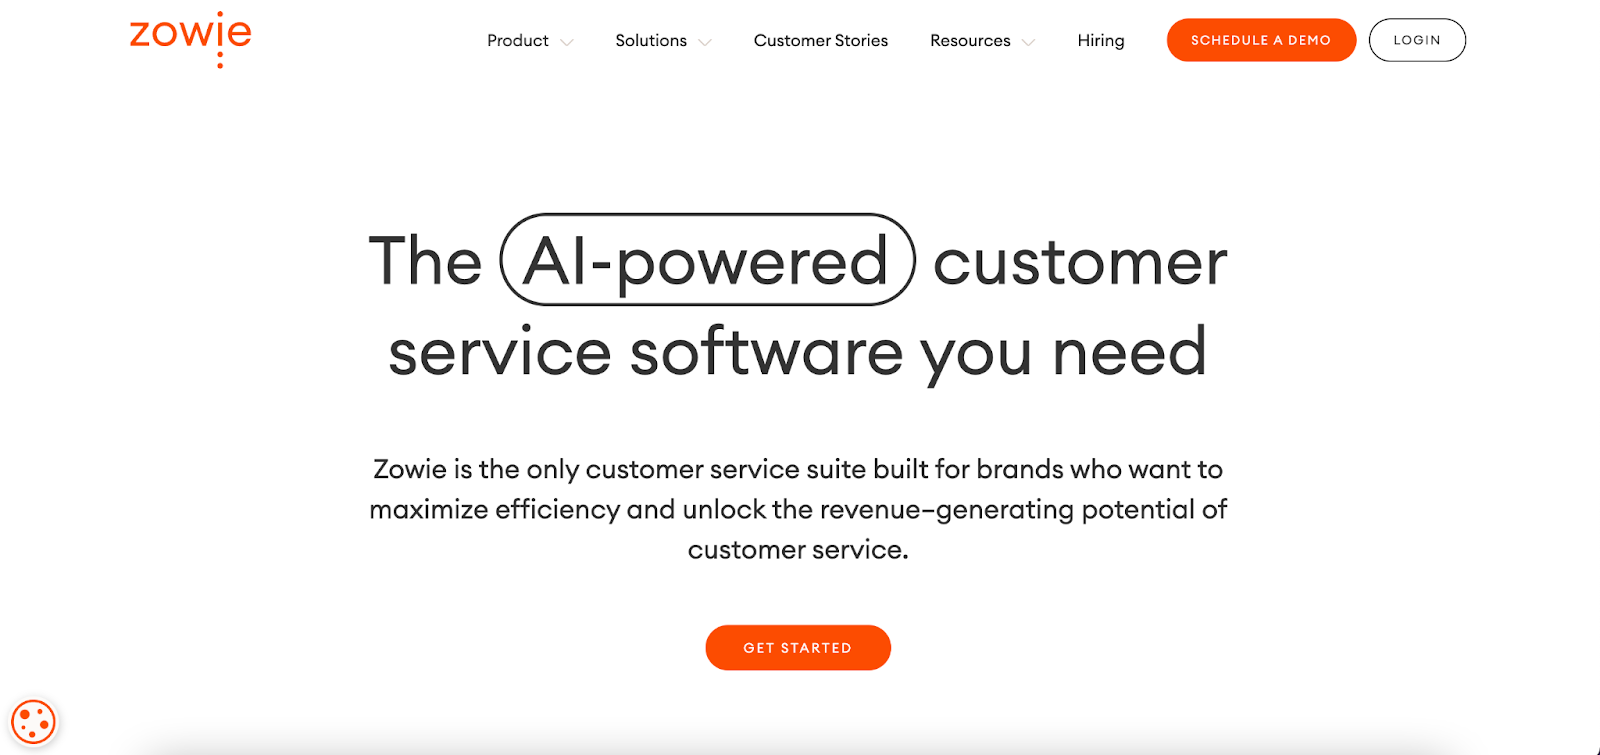 Zowie - ai customer service software for website